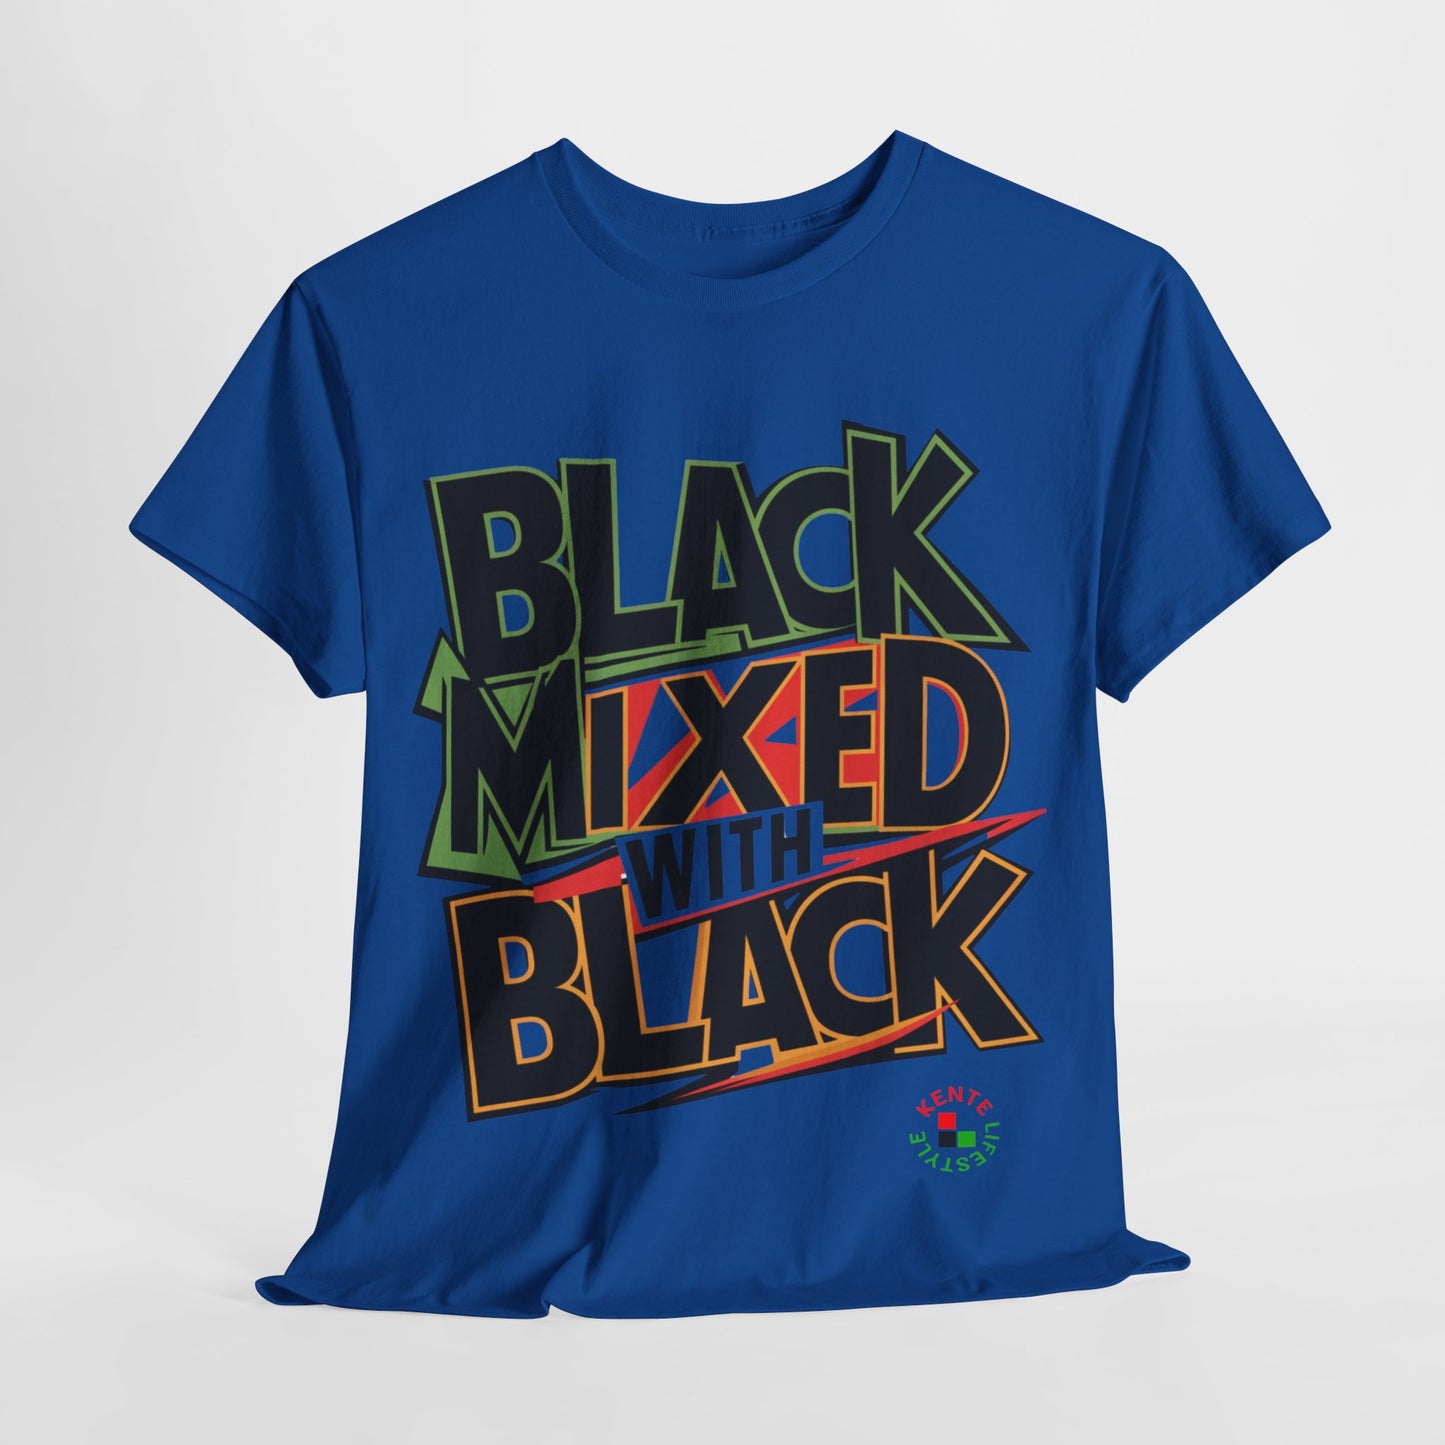 "Black Mixed with Black" -- T-shirt